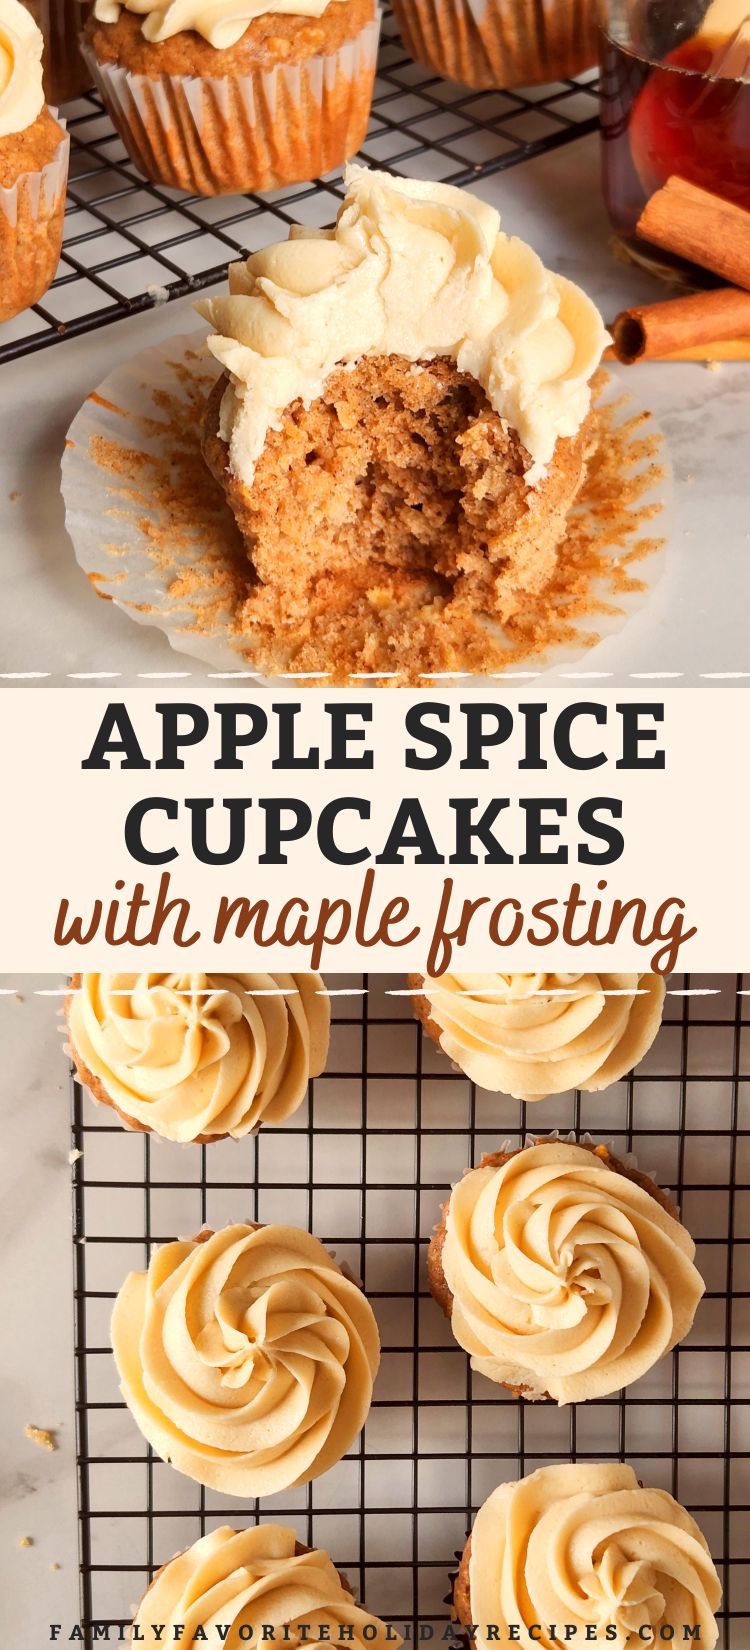 two photos of apple spice cupcakes, including an overhead view of frosted cupcakes on a wire rack, as well as a cupcake with a bite taken out of it